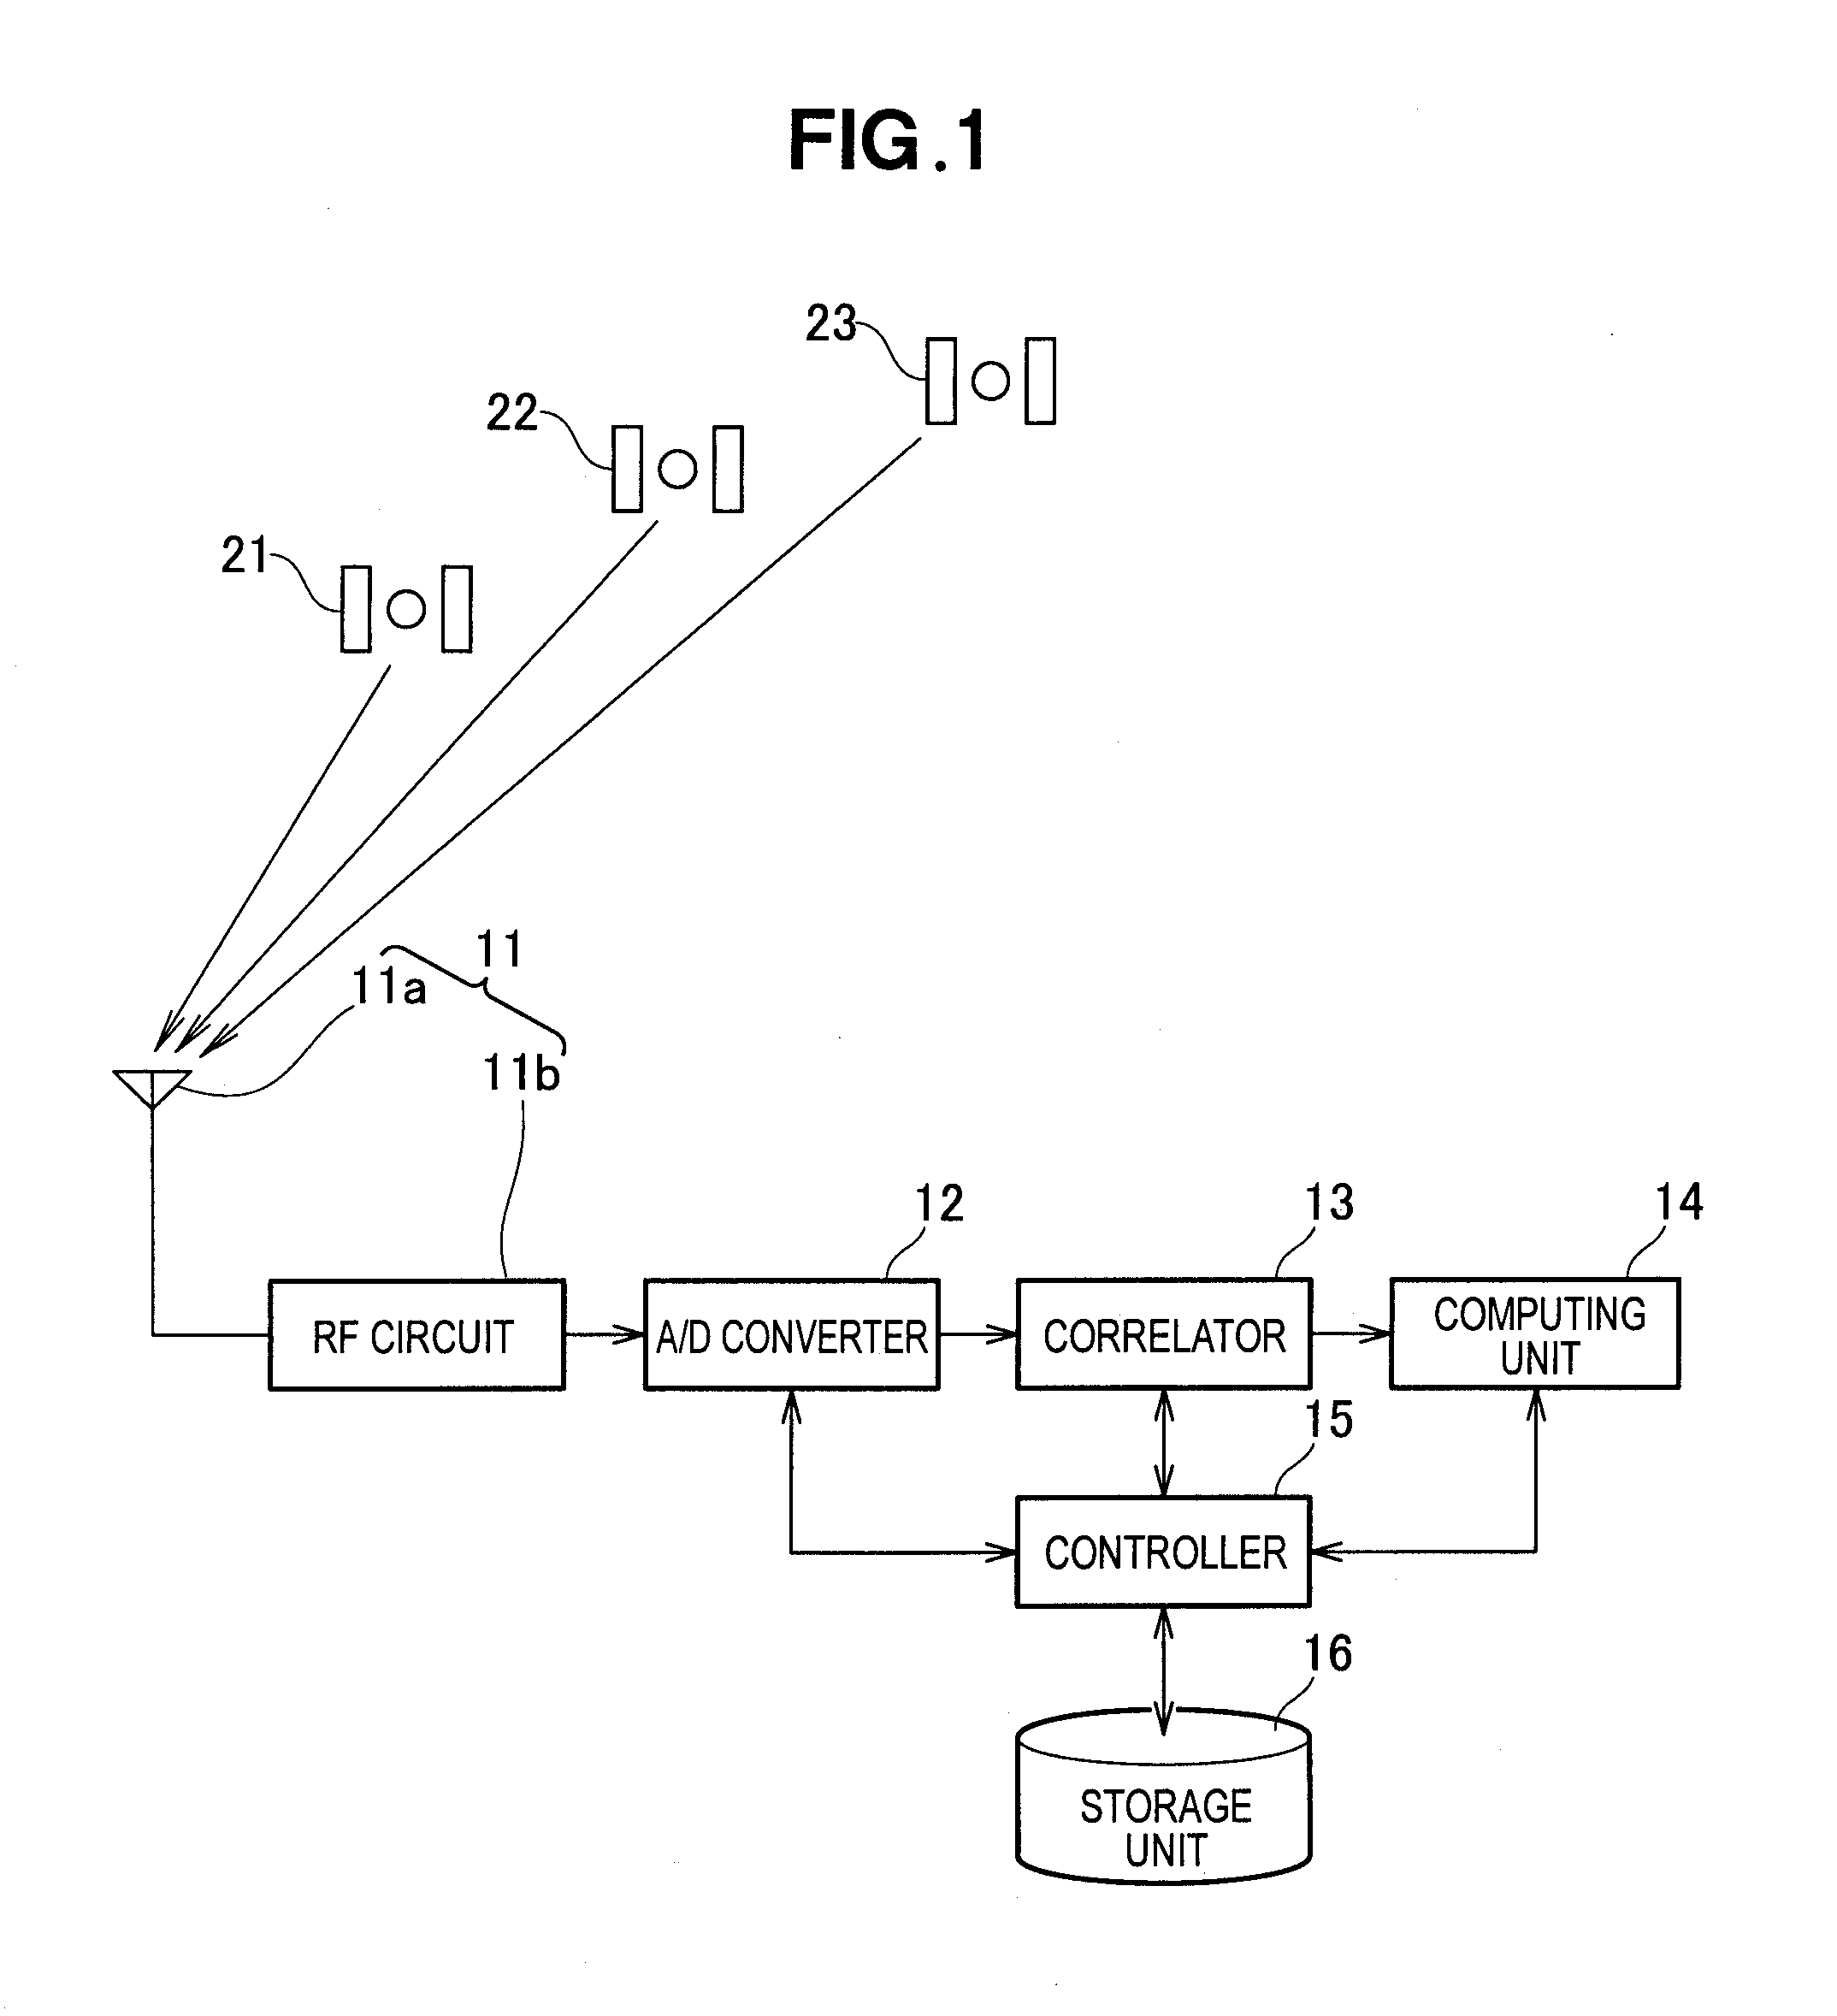 Position calculation method and apparatus with GPS